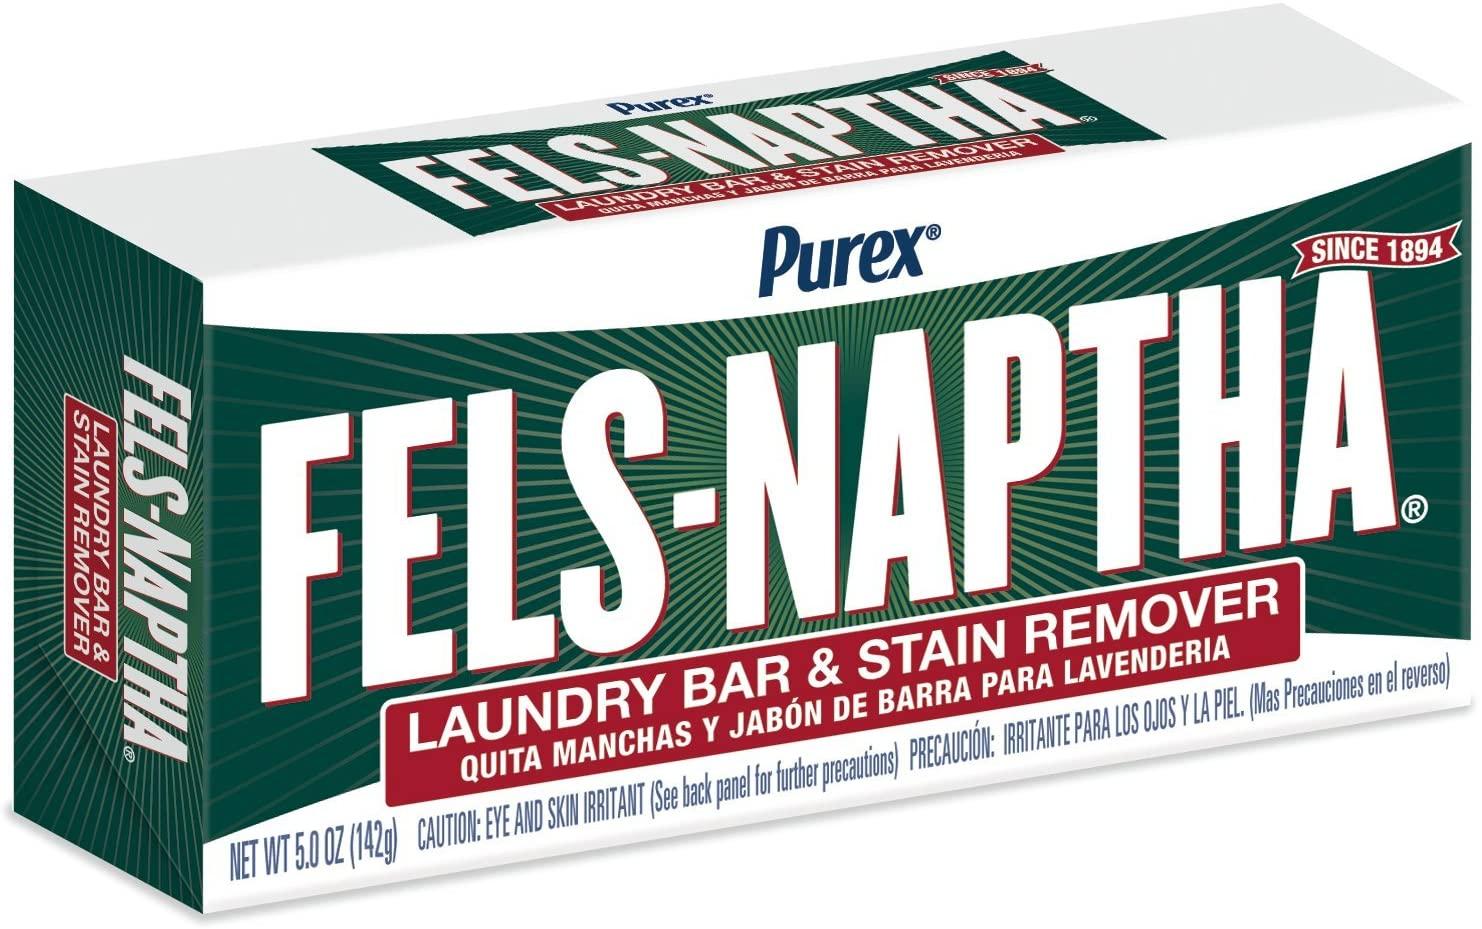 5oz Purex Fels-Naptha Laundry Bar and Stain Remover for $0.84